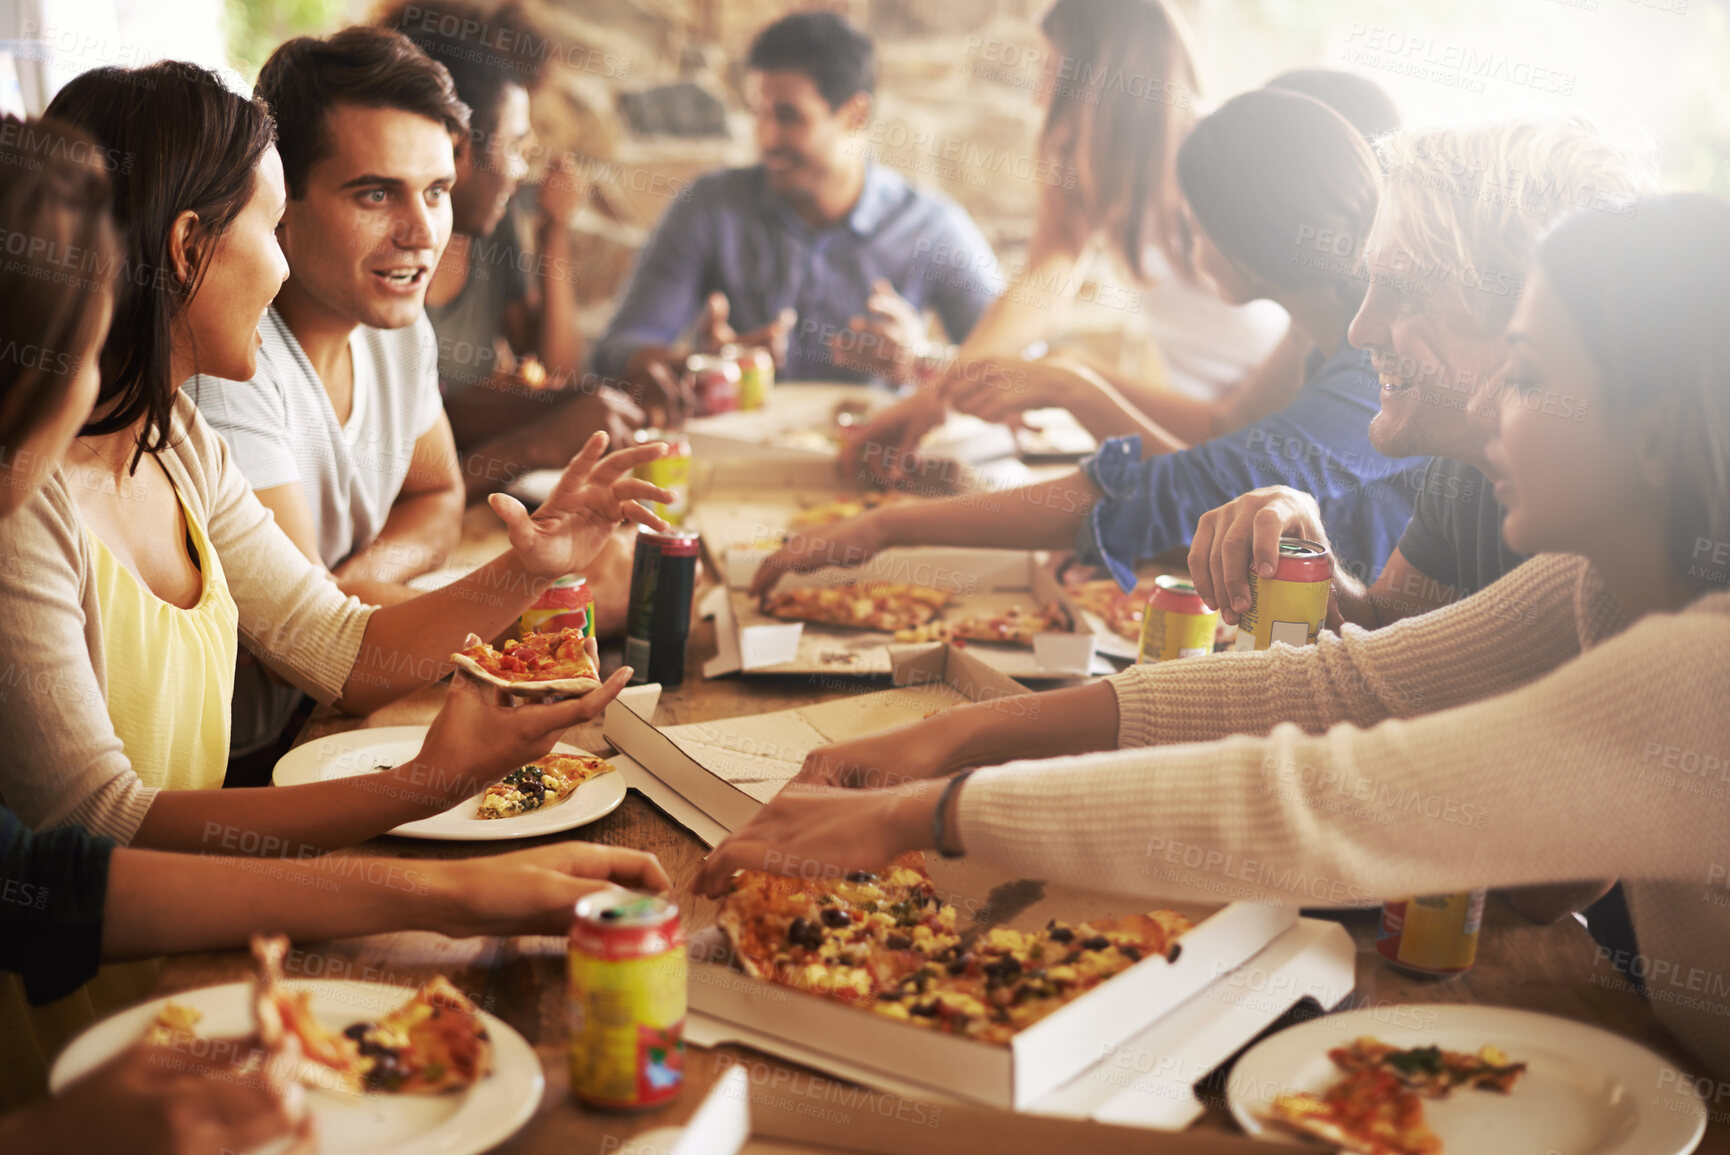 Buy stock photo Fast food, pizza and party with a friends at a restaurant in celebration of a birthday or event together. Cafe, diversity and eating with a man and woman friend group sitting around a table for food